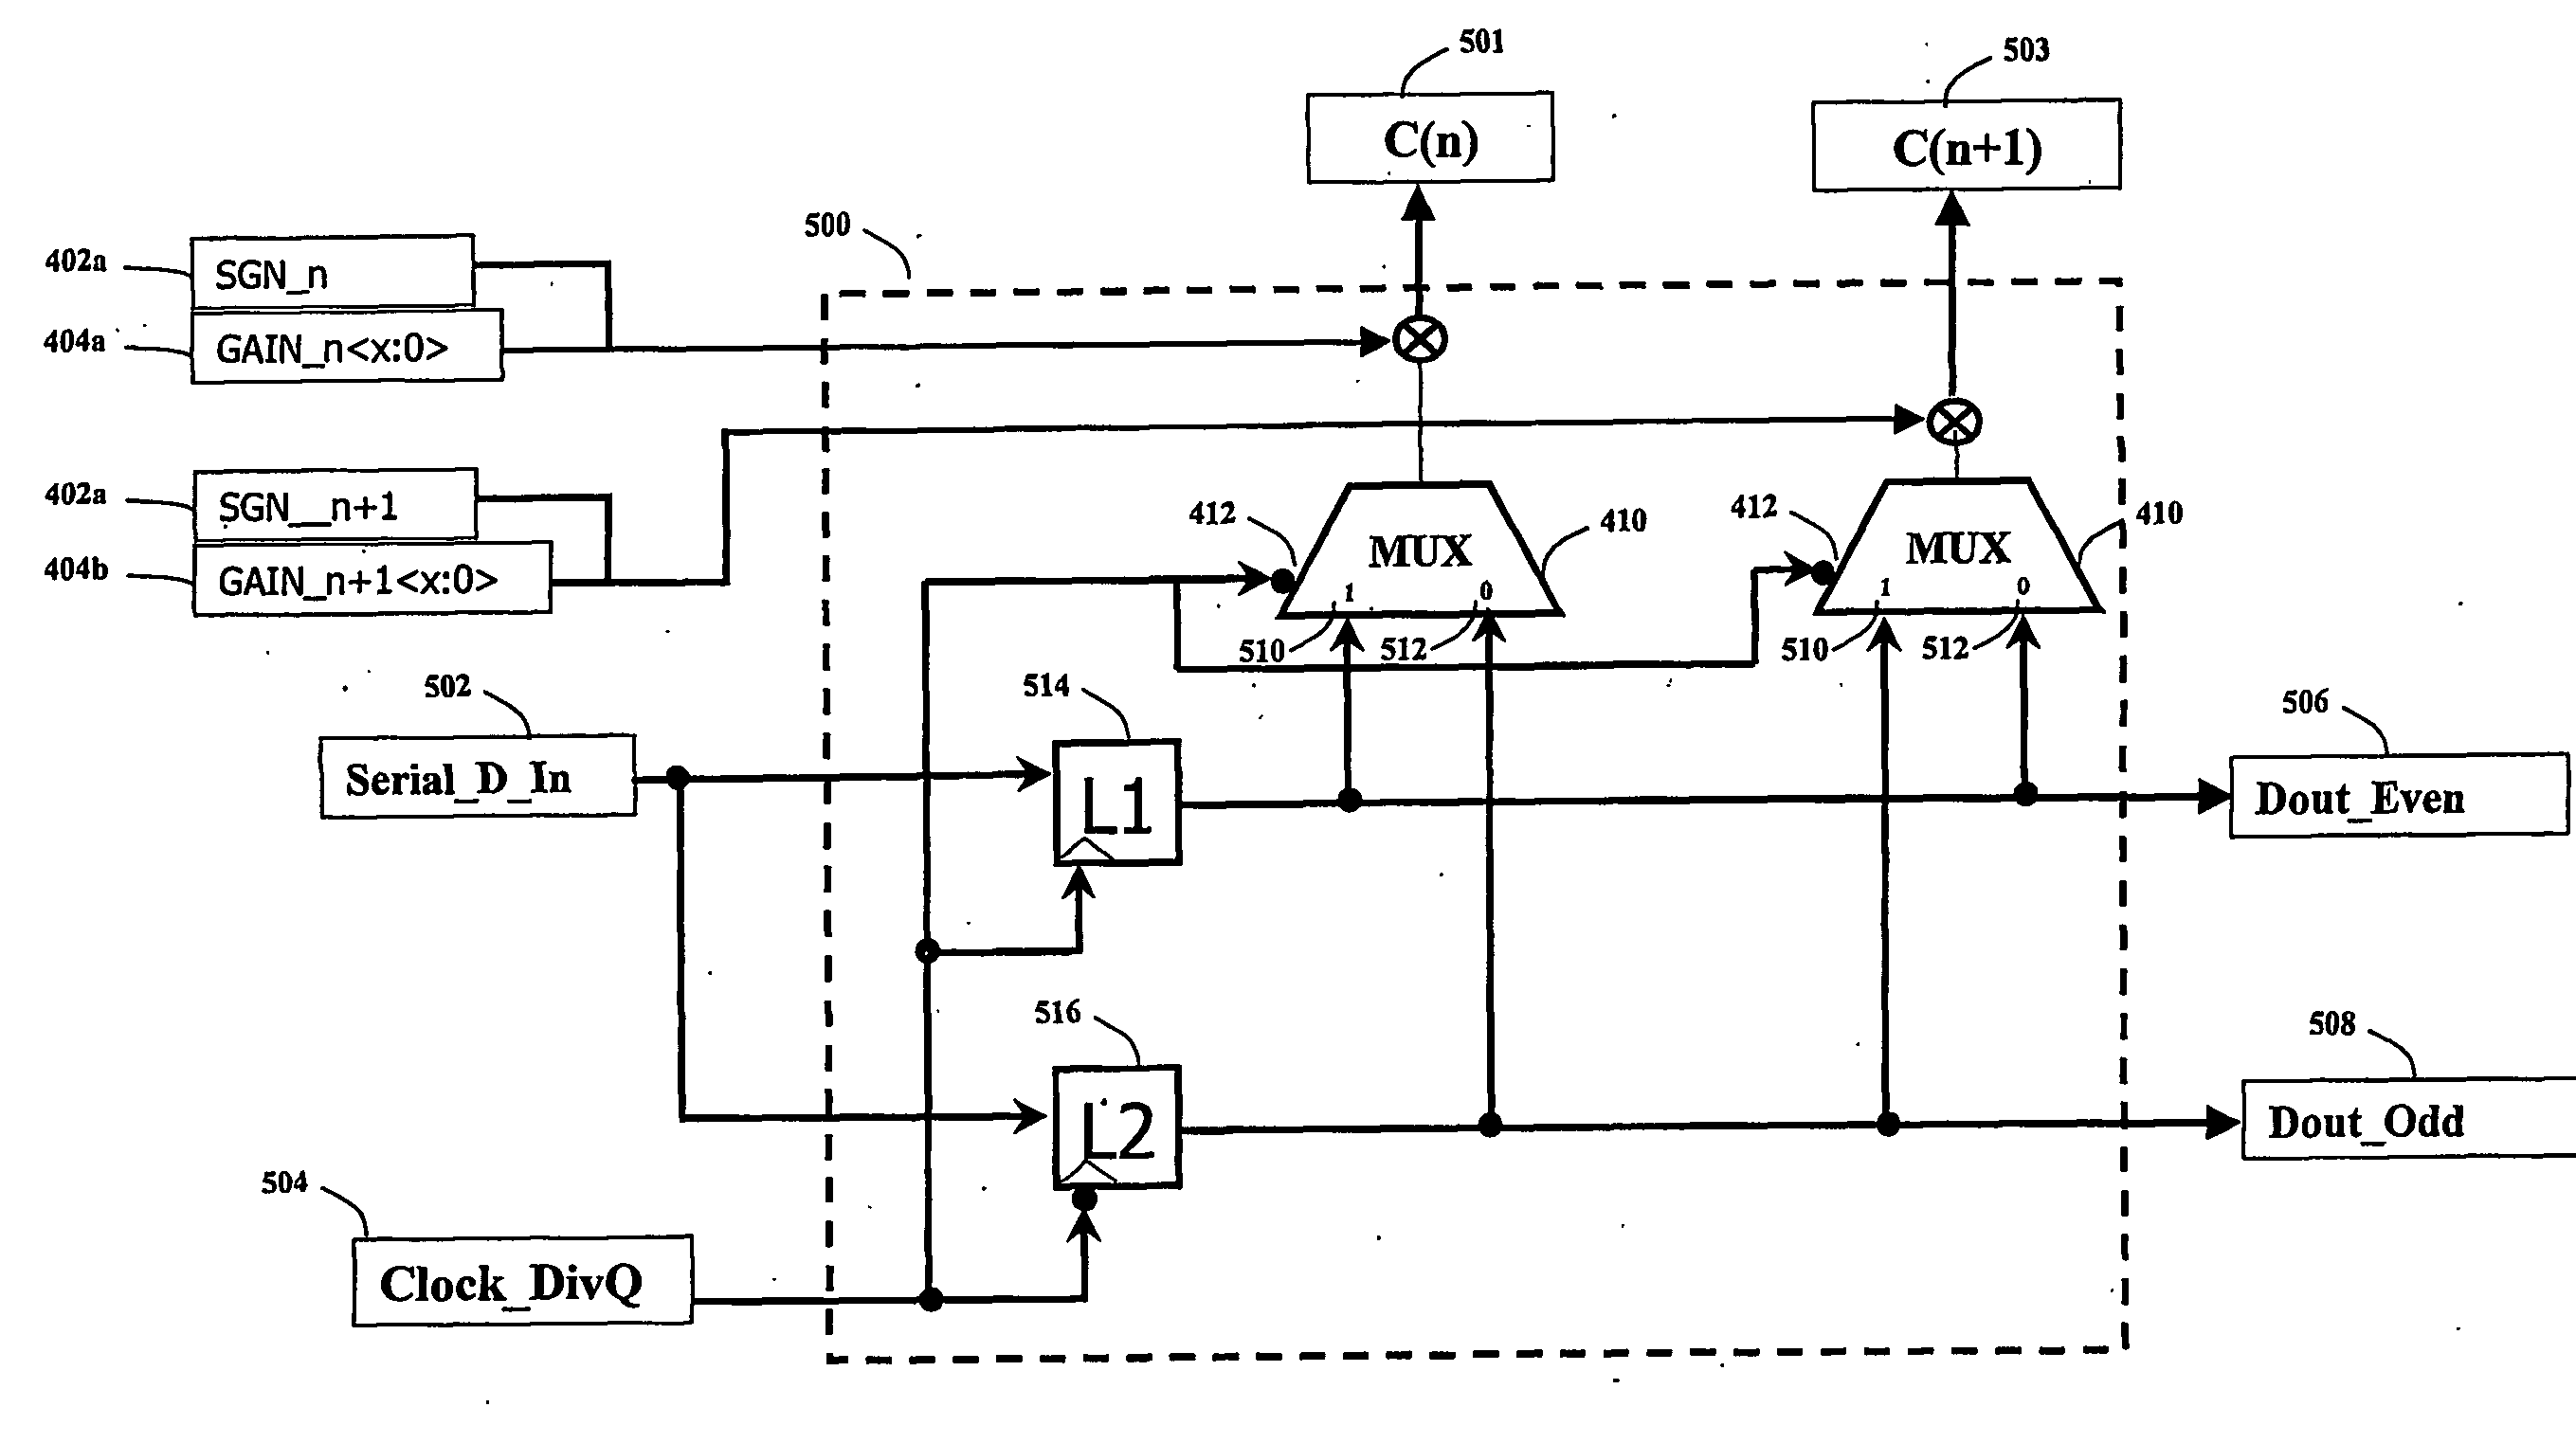 Operating frequency reduction for transversal fir filter